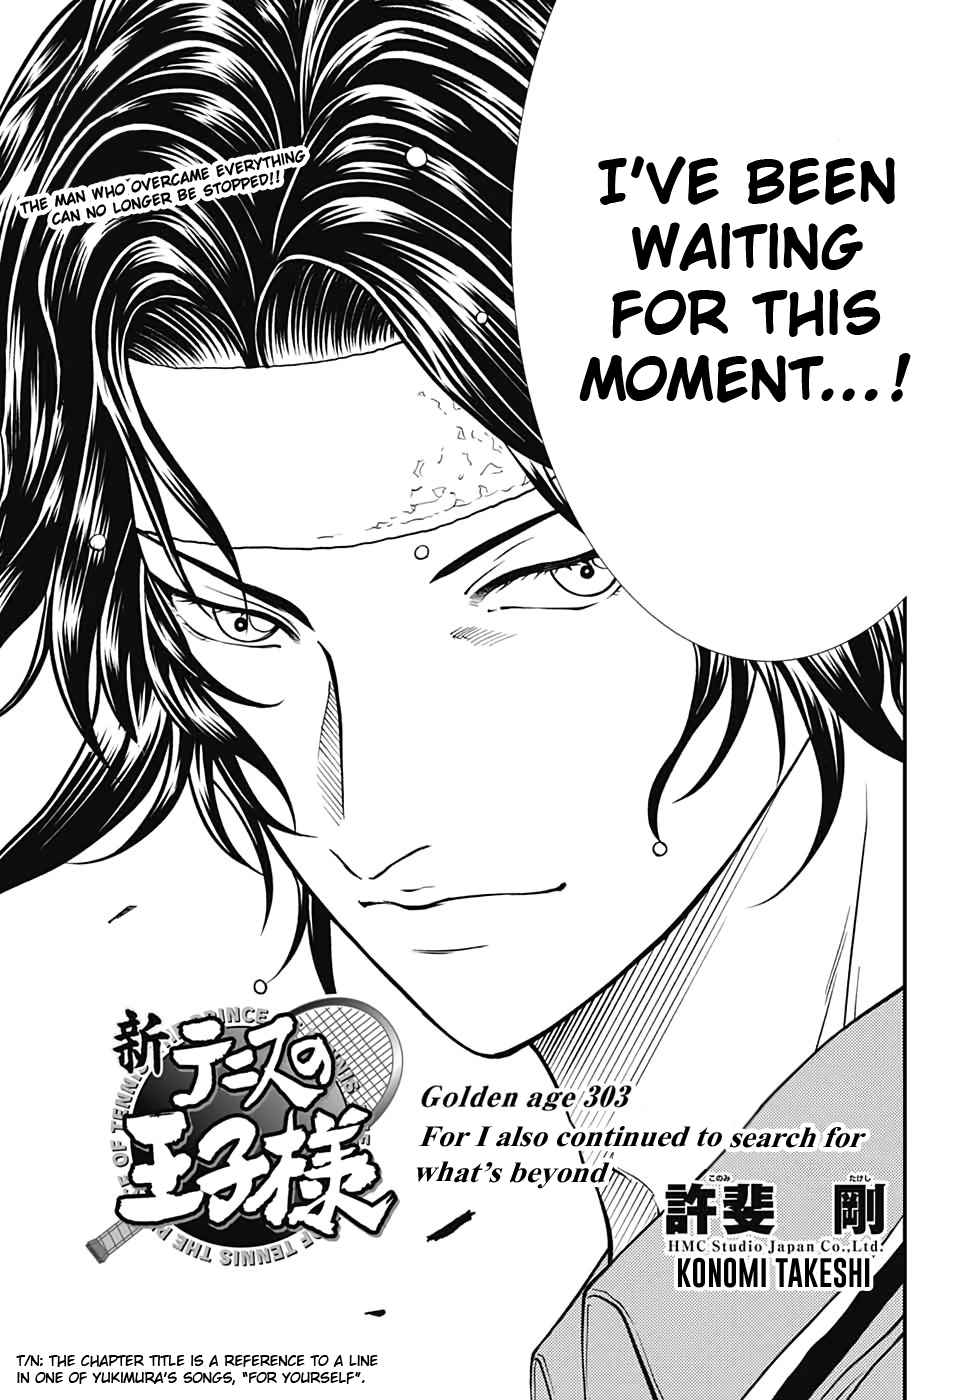 Shin Tennis no Oujisama Vol. 30 Ch. 303 For I Also Continued to Search for What's Beyond